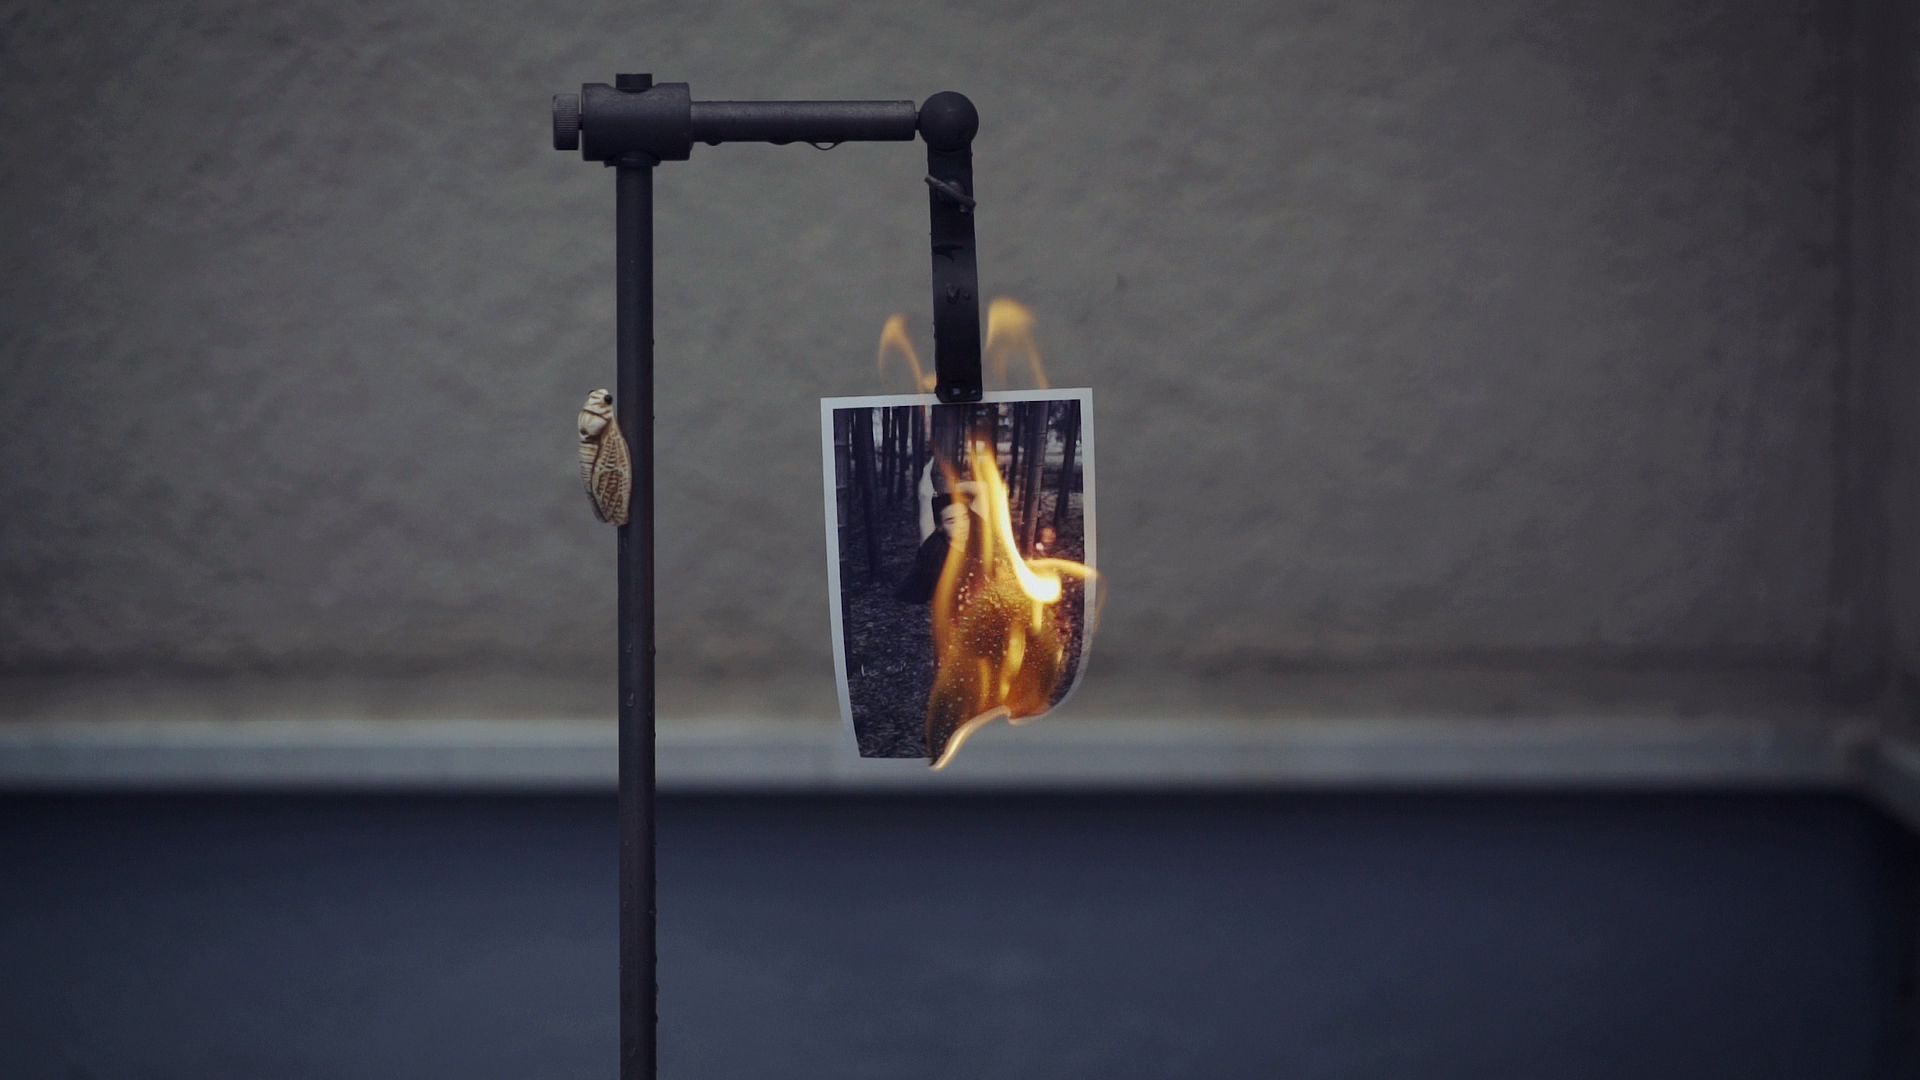 It’s A Video Of Burning Prints That Took Some Courage To Do | Tim Gallo